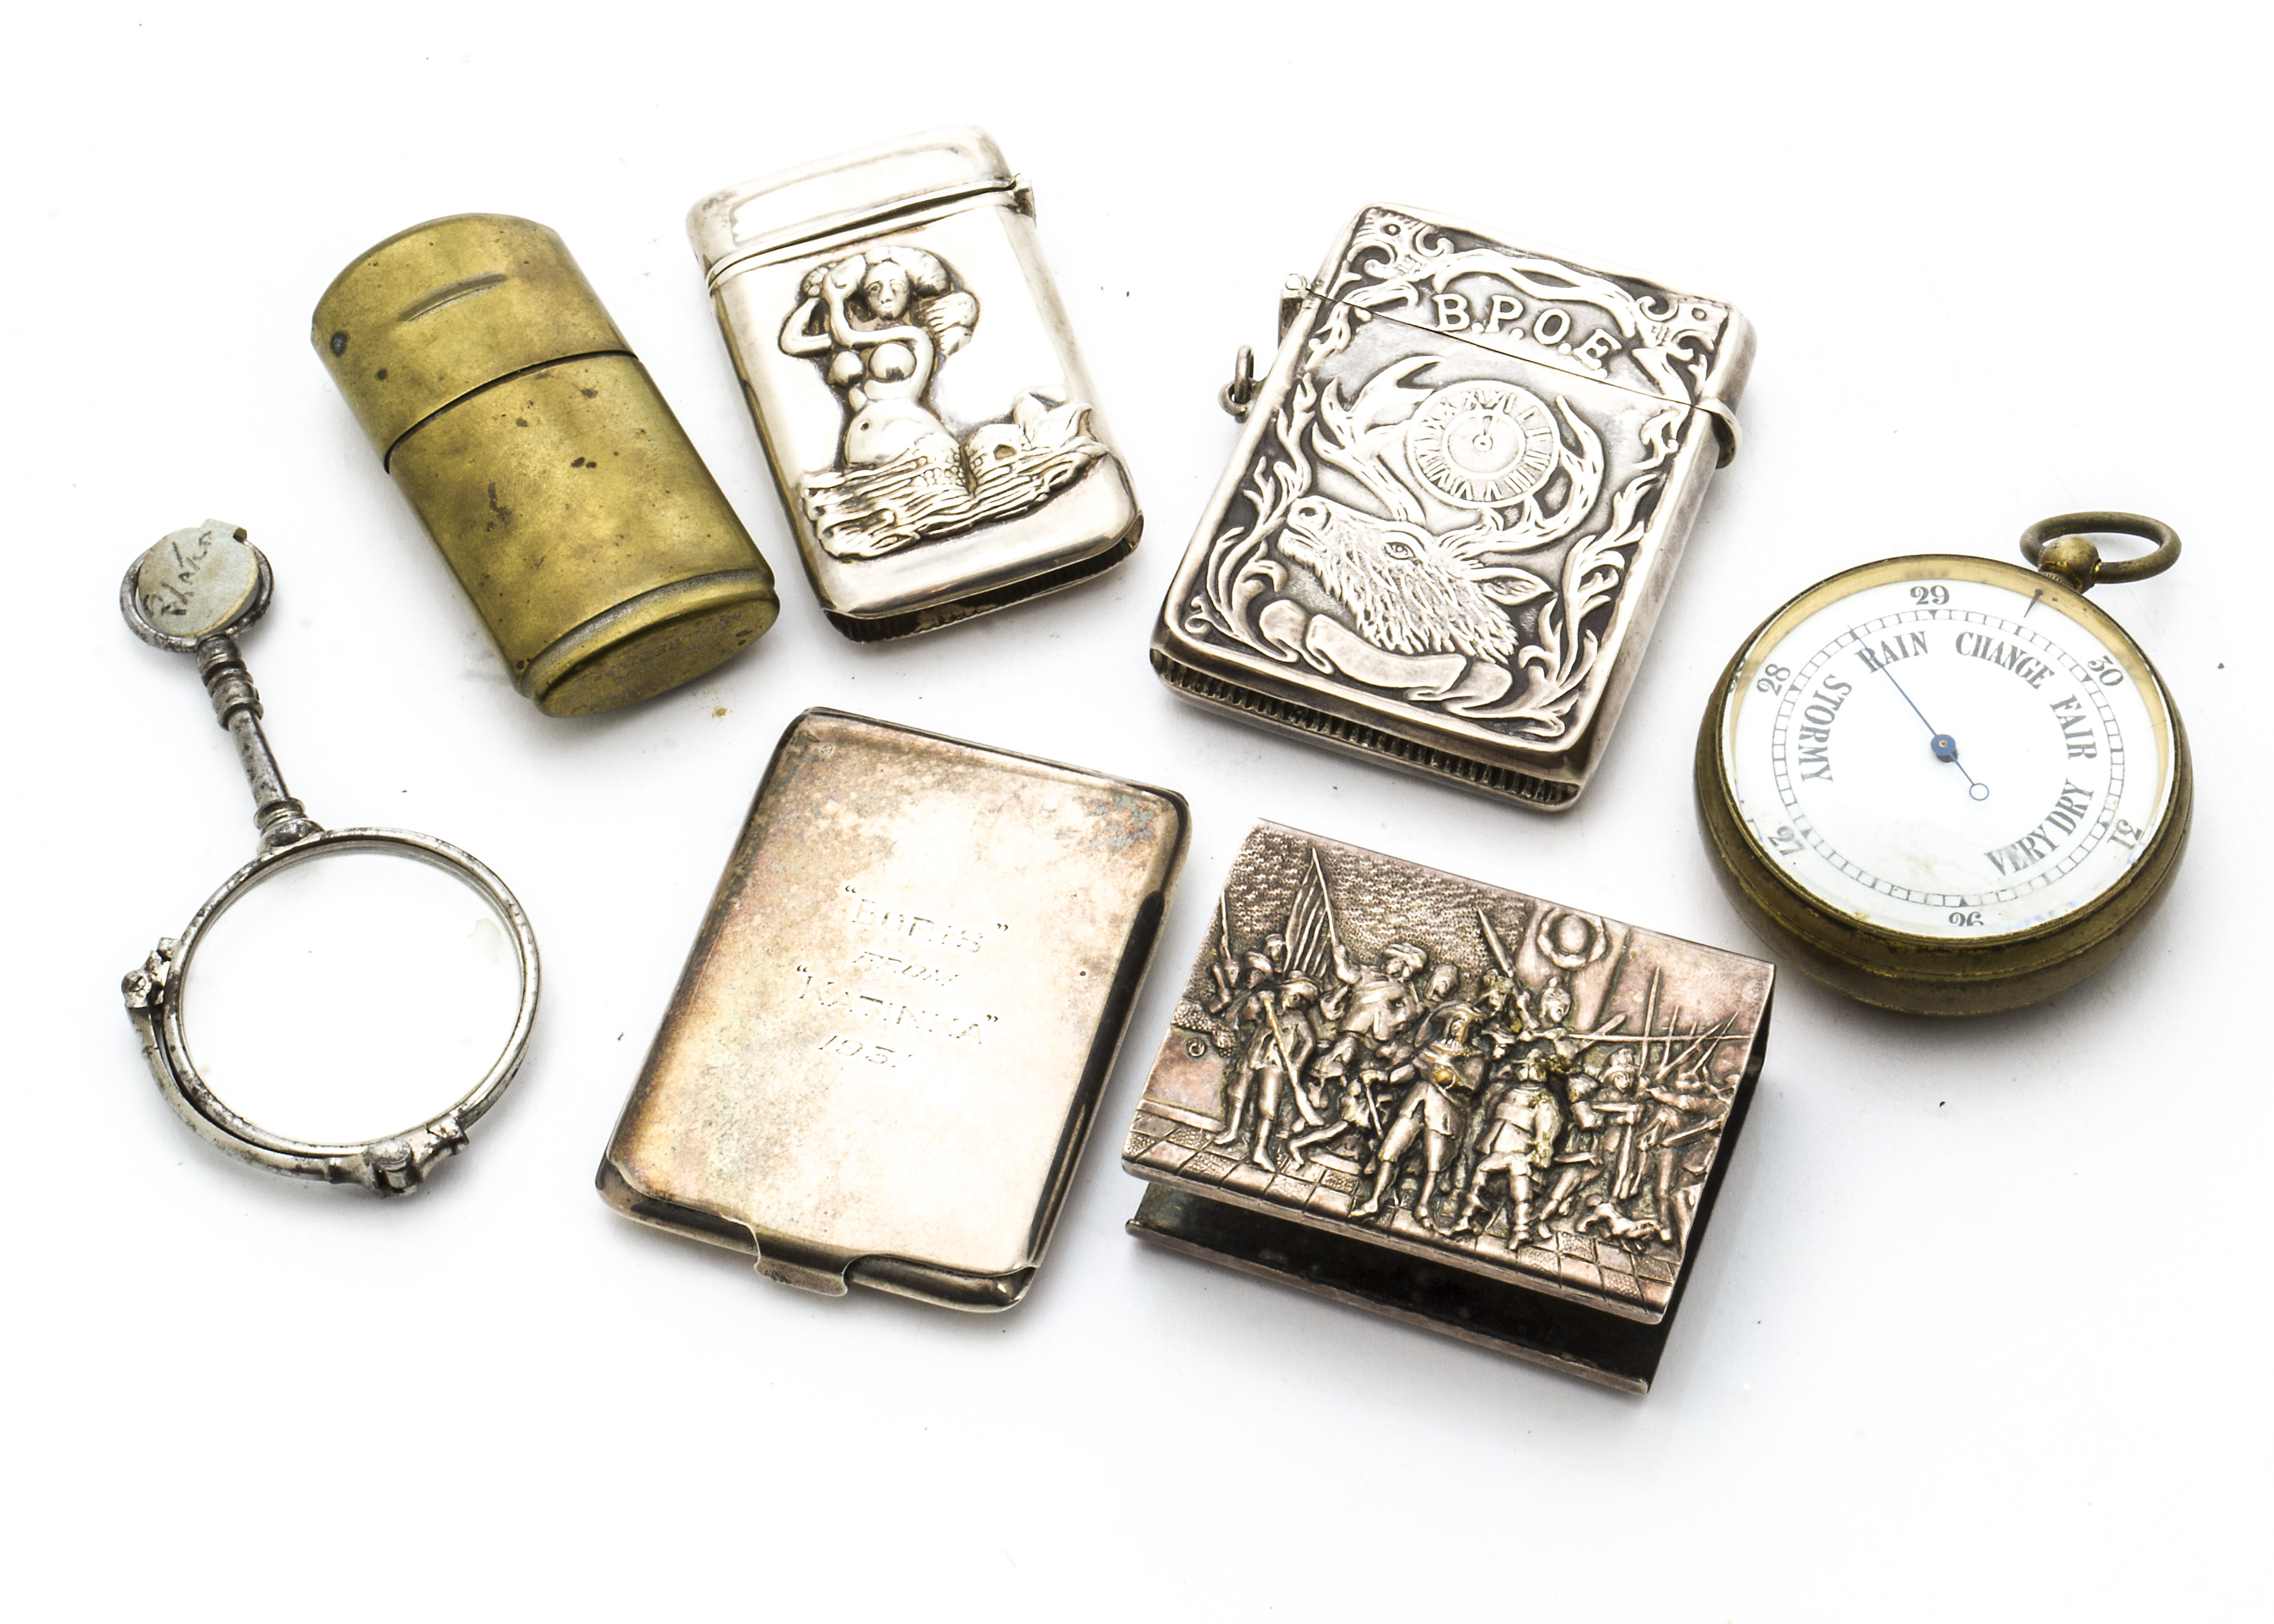 A group of nine small works of art, including a silver US Benevolent & Protective Order of Elks